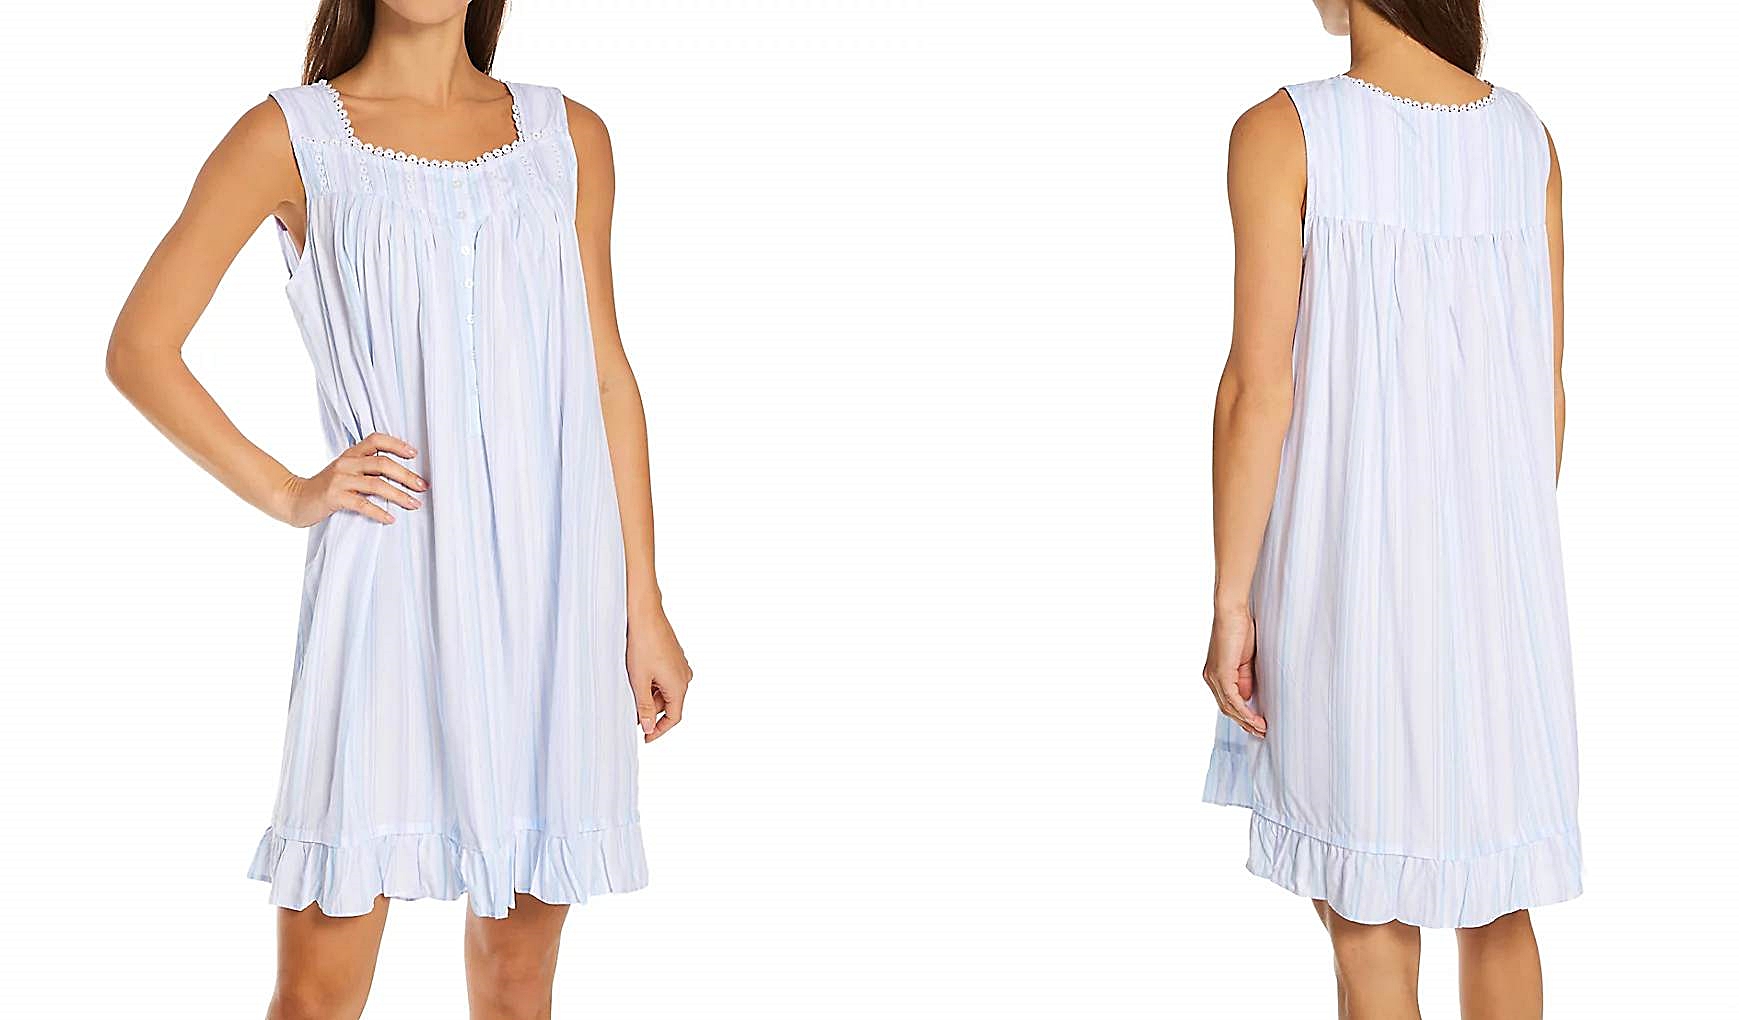 Eileen West Nightgowns - 5 Easy Essentials You Need To Know